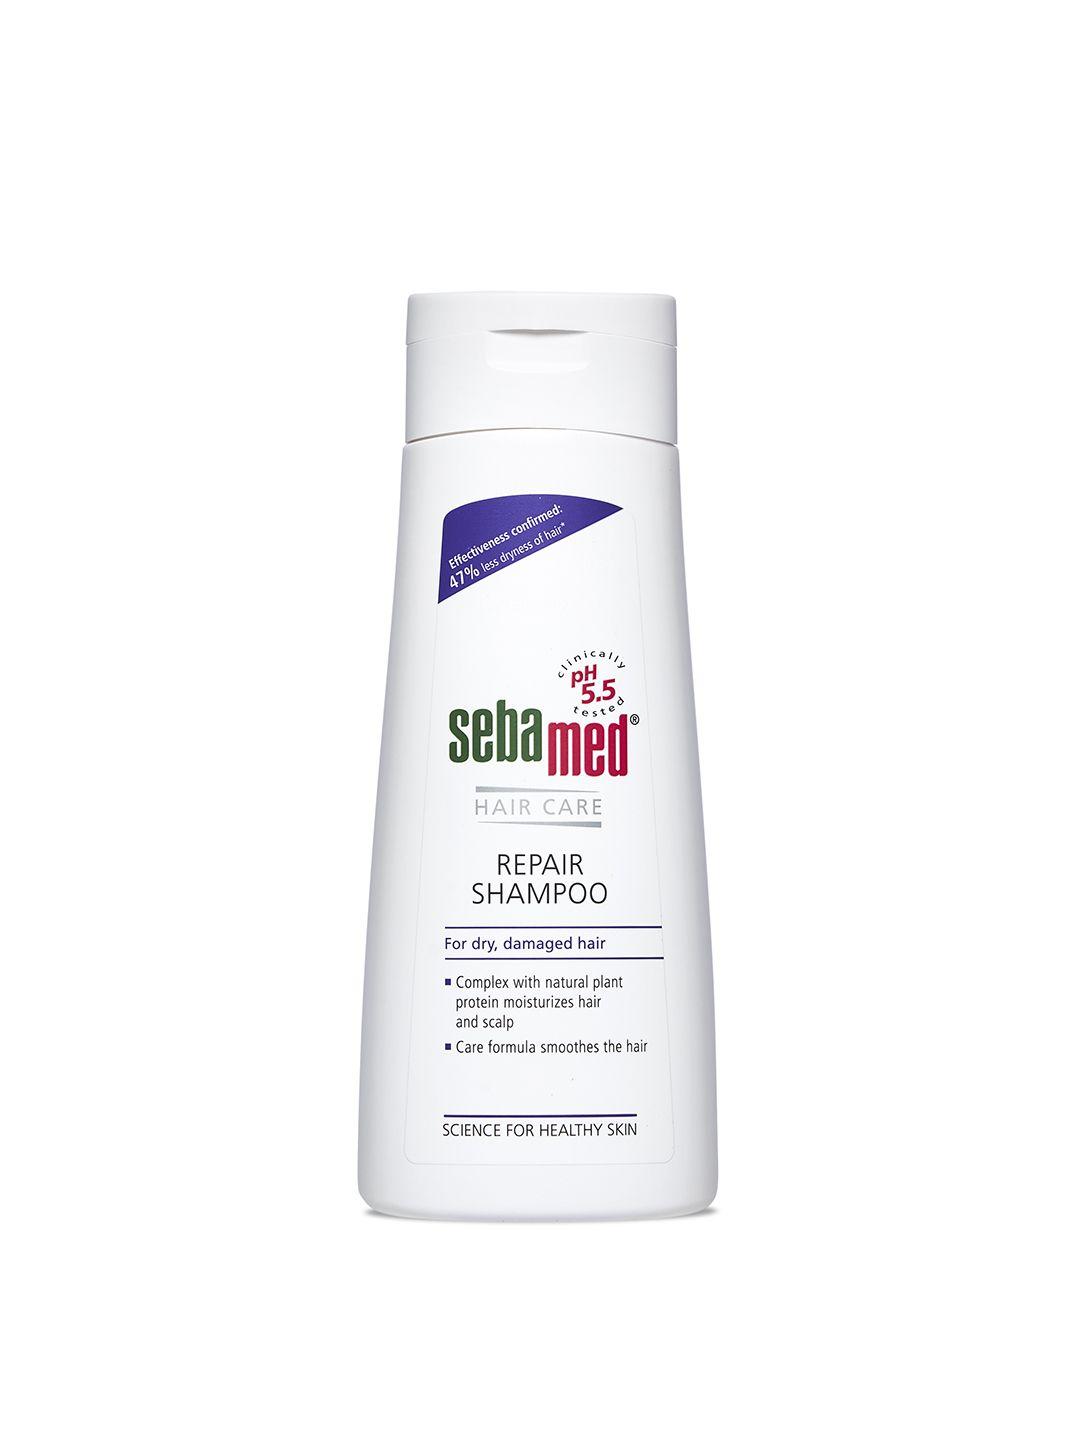 sebamed hair care repair shampoo for dry damaged hair with natural plant protein - 200ml